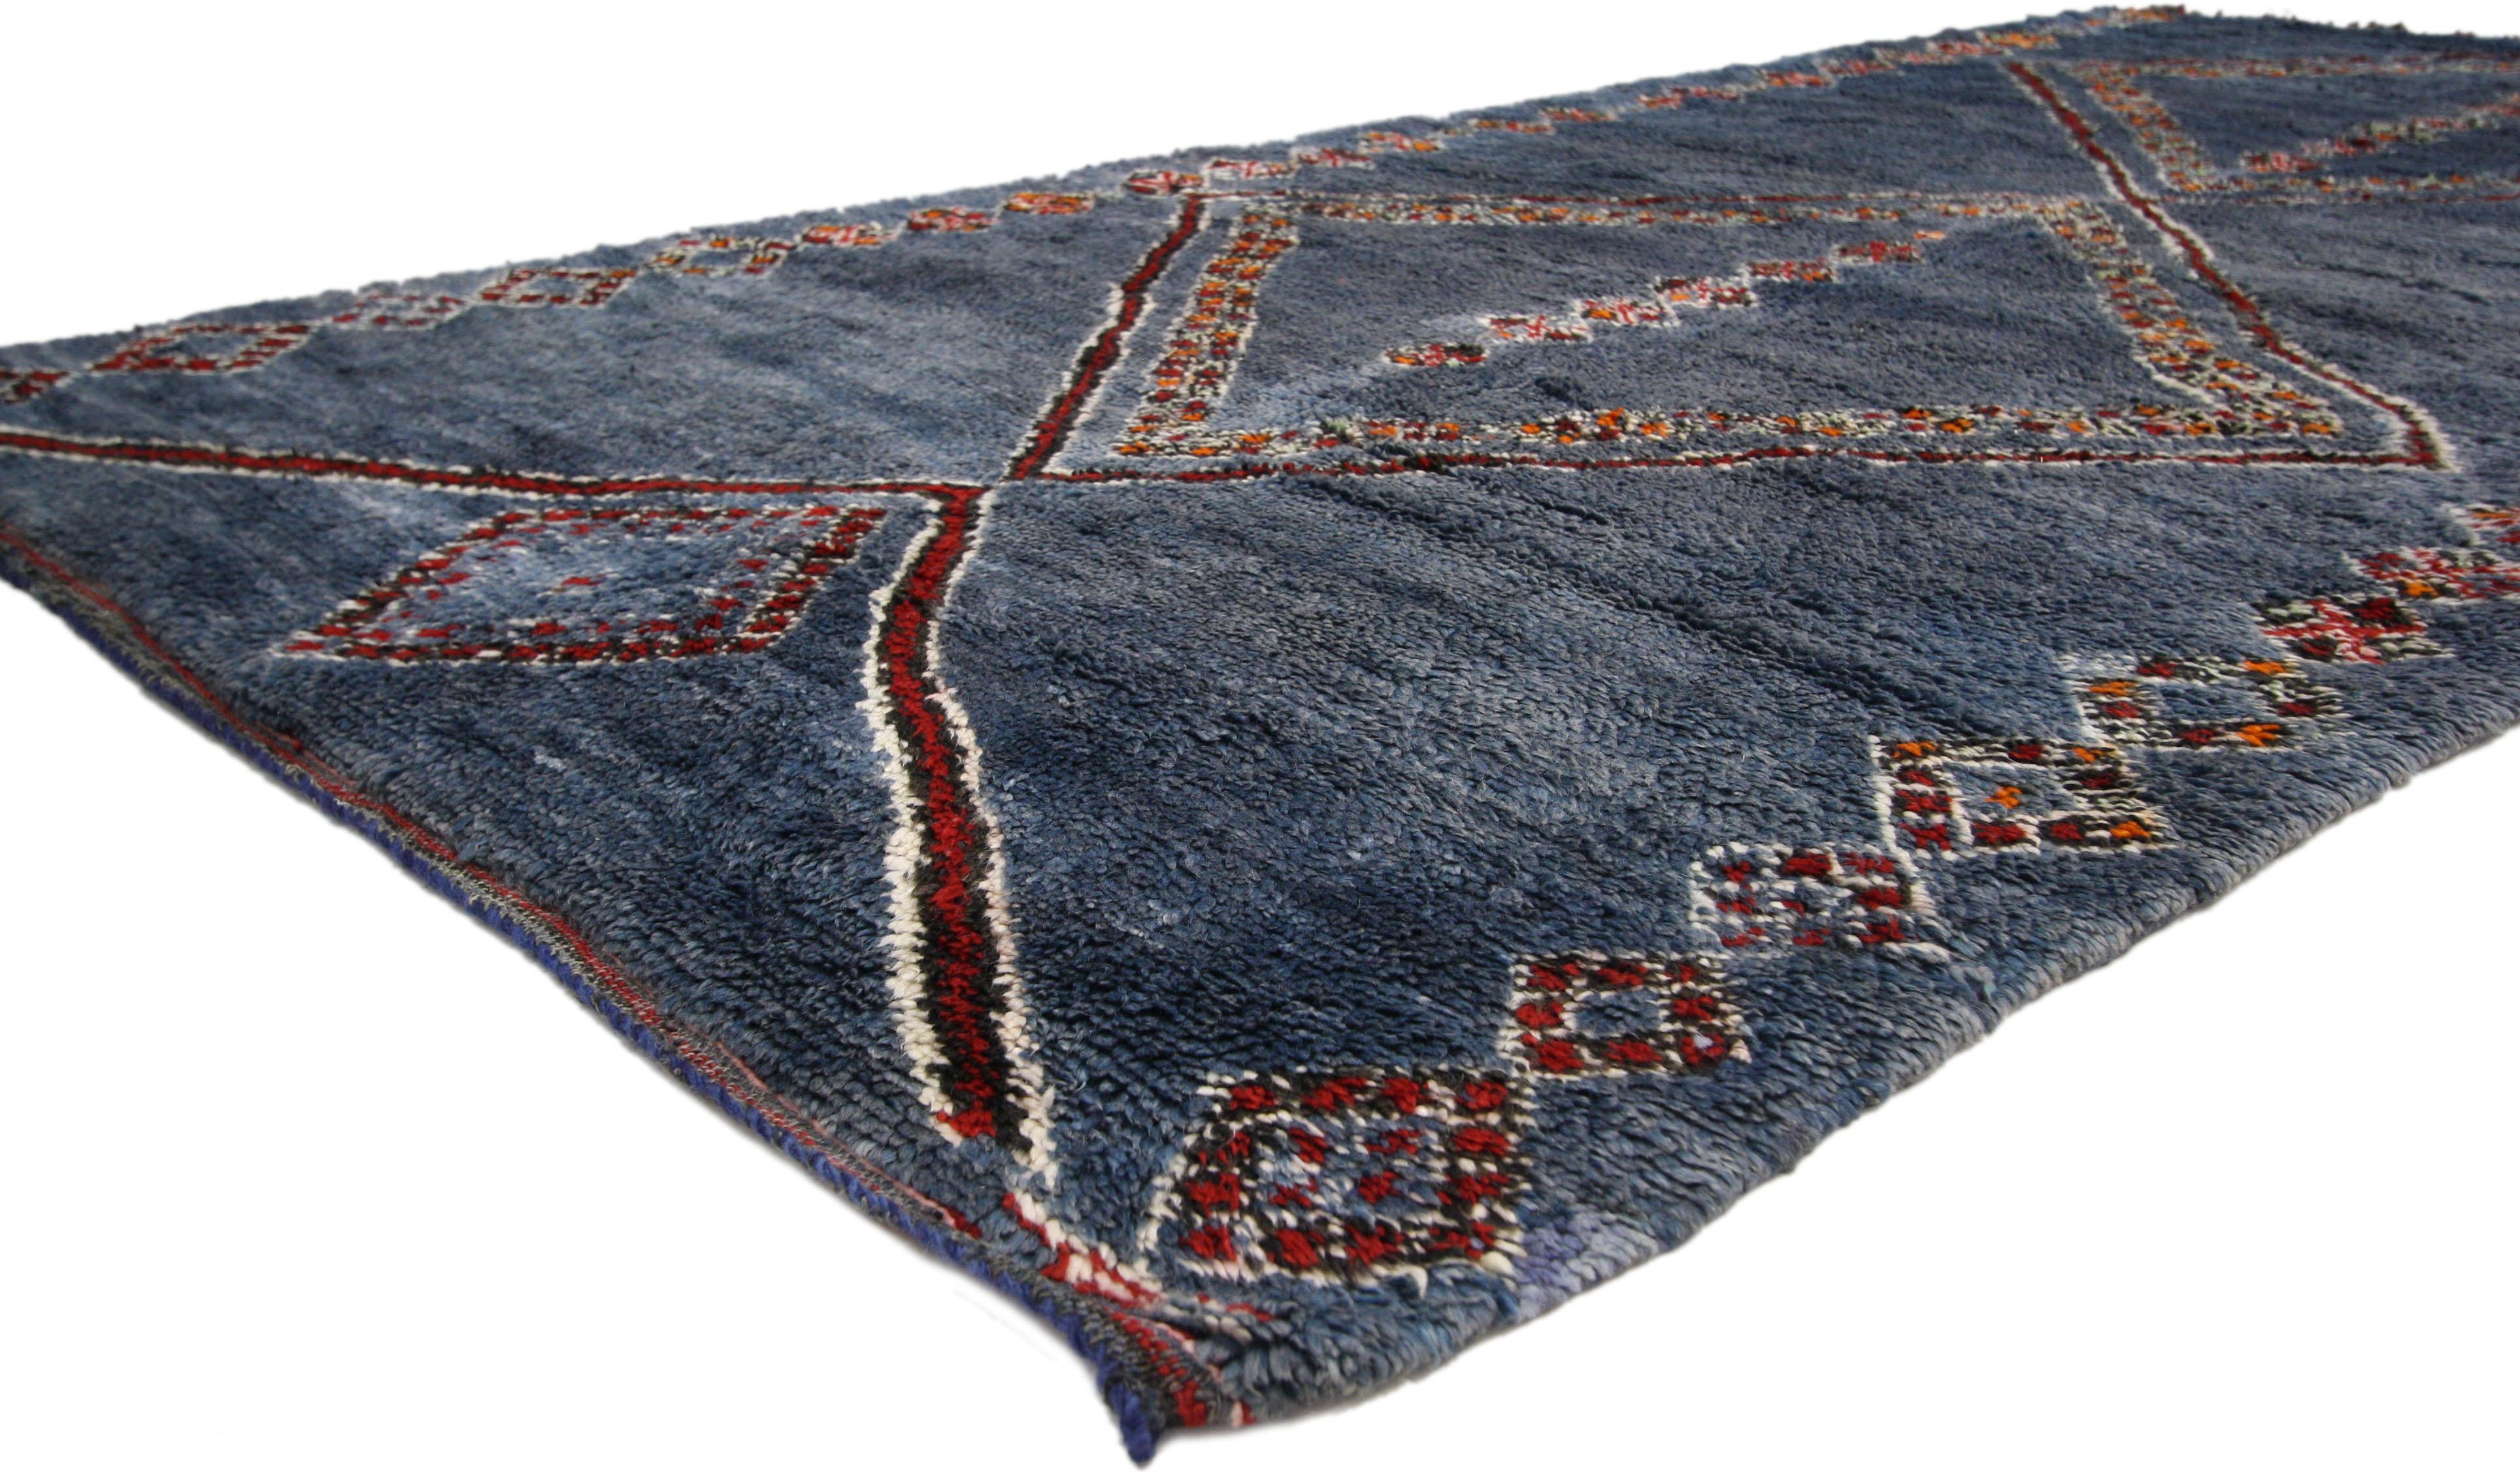 20728, vintage blue indigo Beni M'Guild Moroccan rug with tribal style, Berber Moroccan carpet. This hand knotted wool vintage blue Indigo Beni M'Guild Moroccan rug is an exceptional representation of Berber culture and symbolism. The